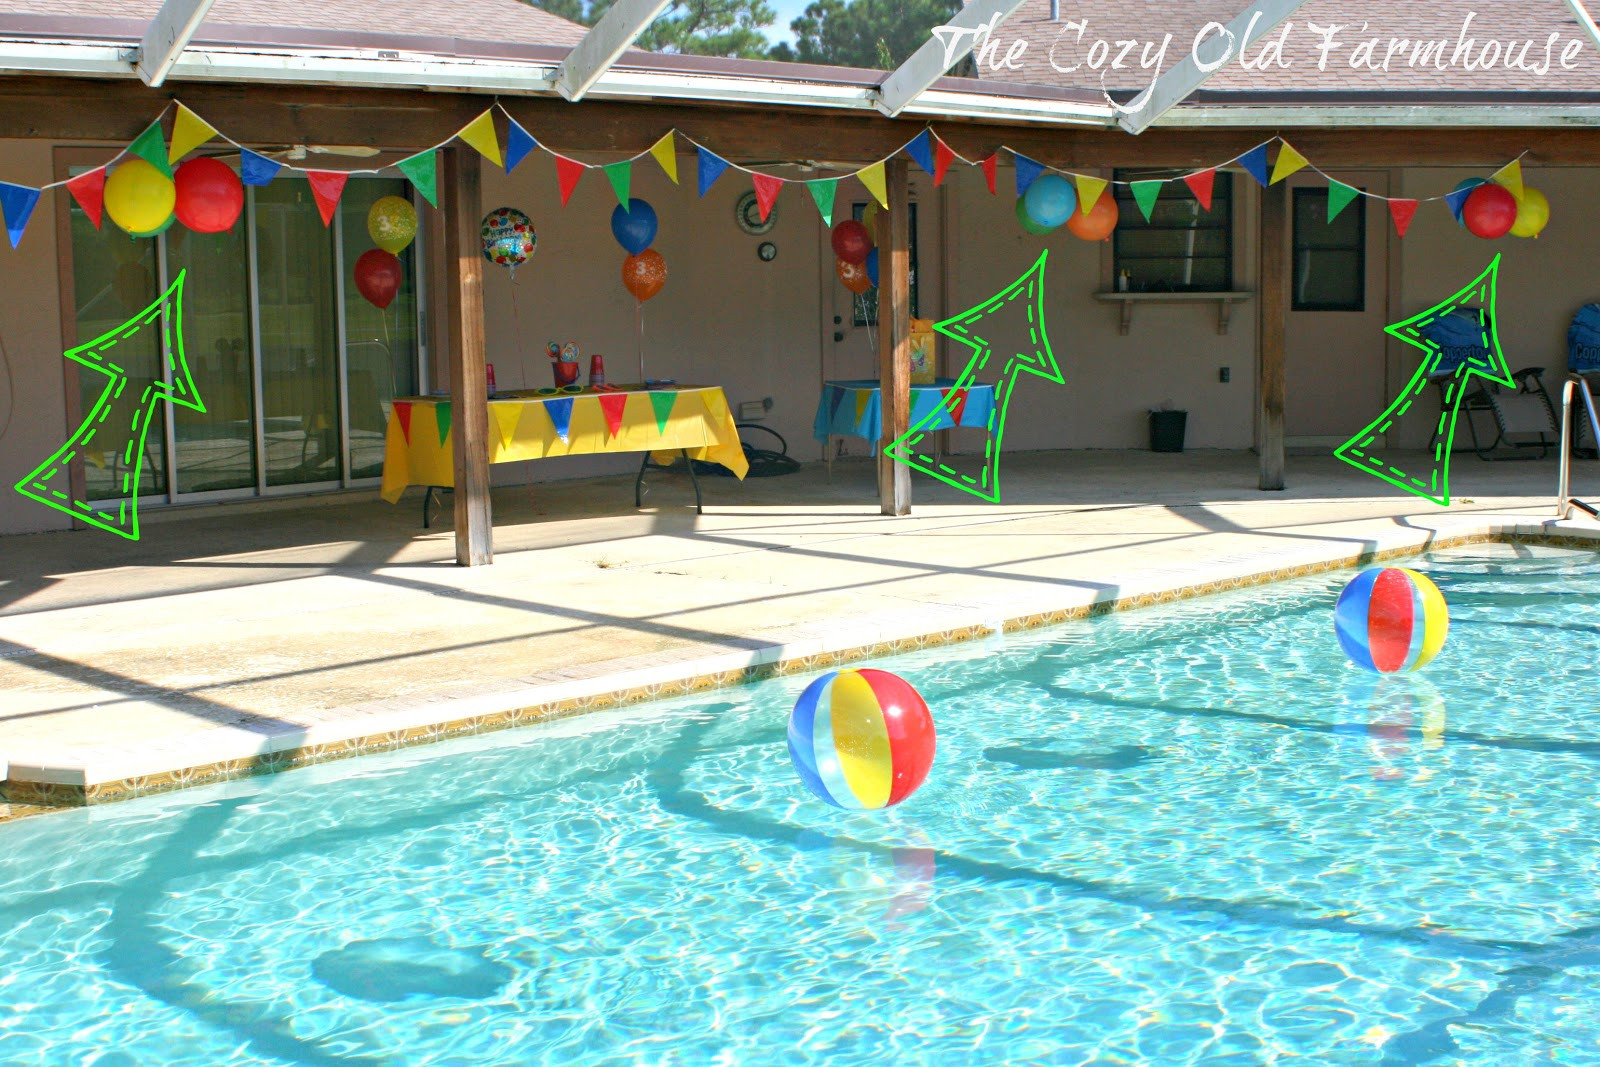 Pool Party Ideas For Toddlers
 The Cozy Old "Farmhouse" Simple and Bud Friendly Pool